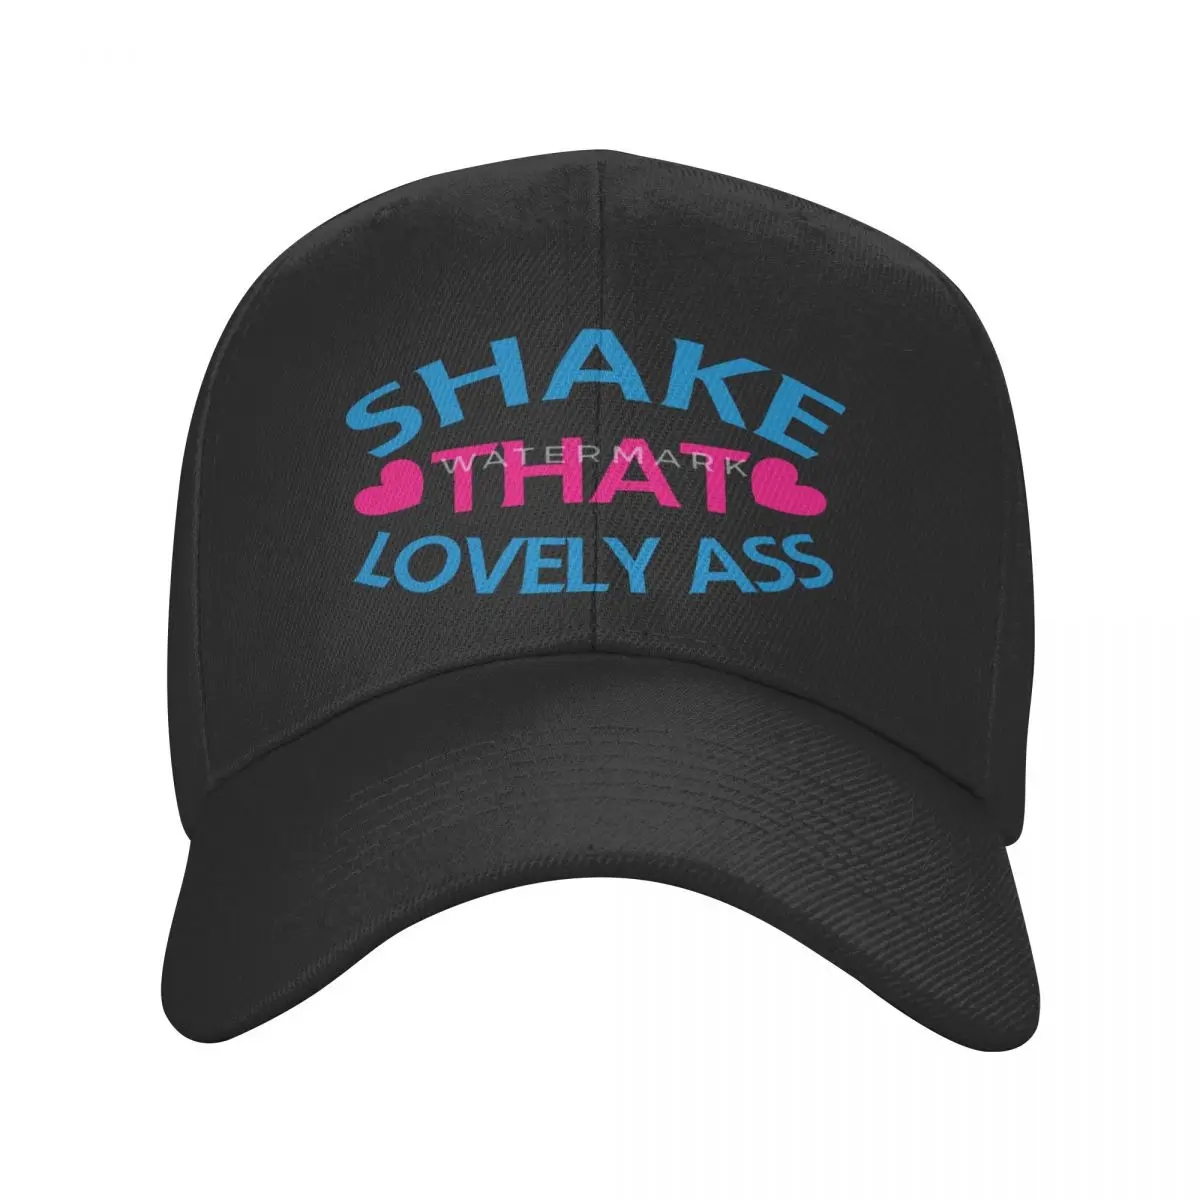 

SHAKE That Lovely Heart Ass Casquette, Polyester Cap Trendy Practical Gift Nice Gift